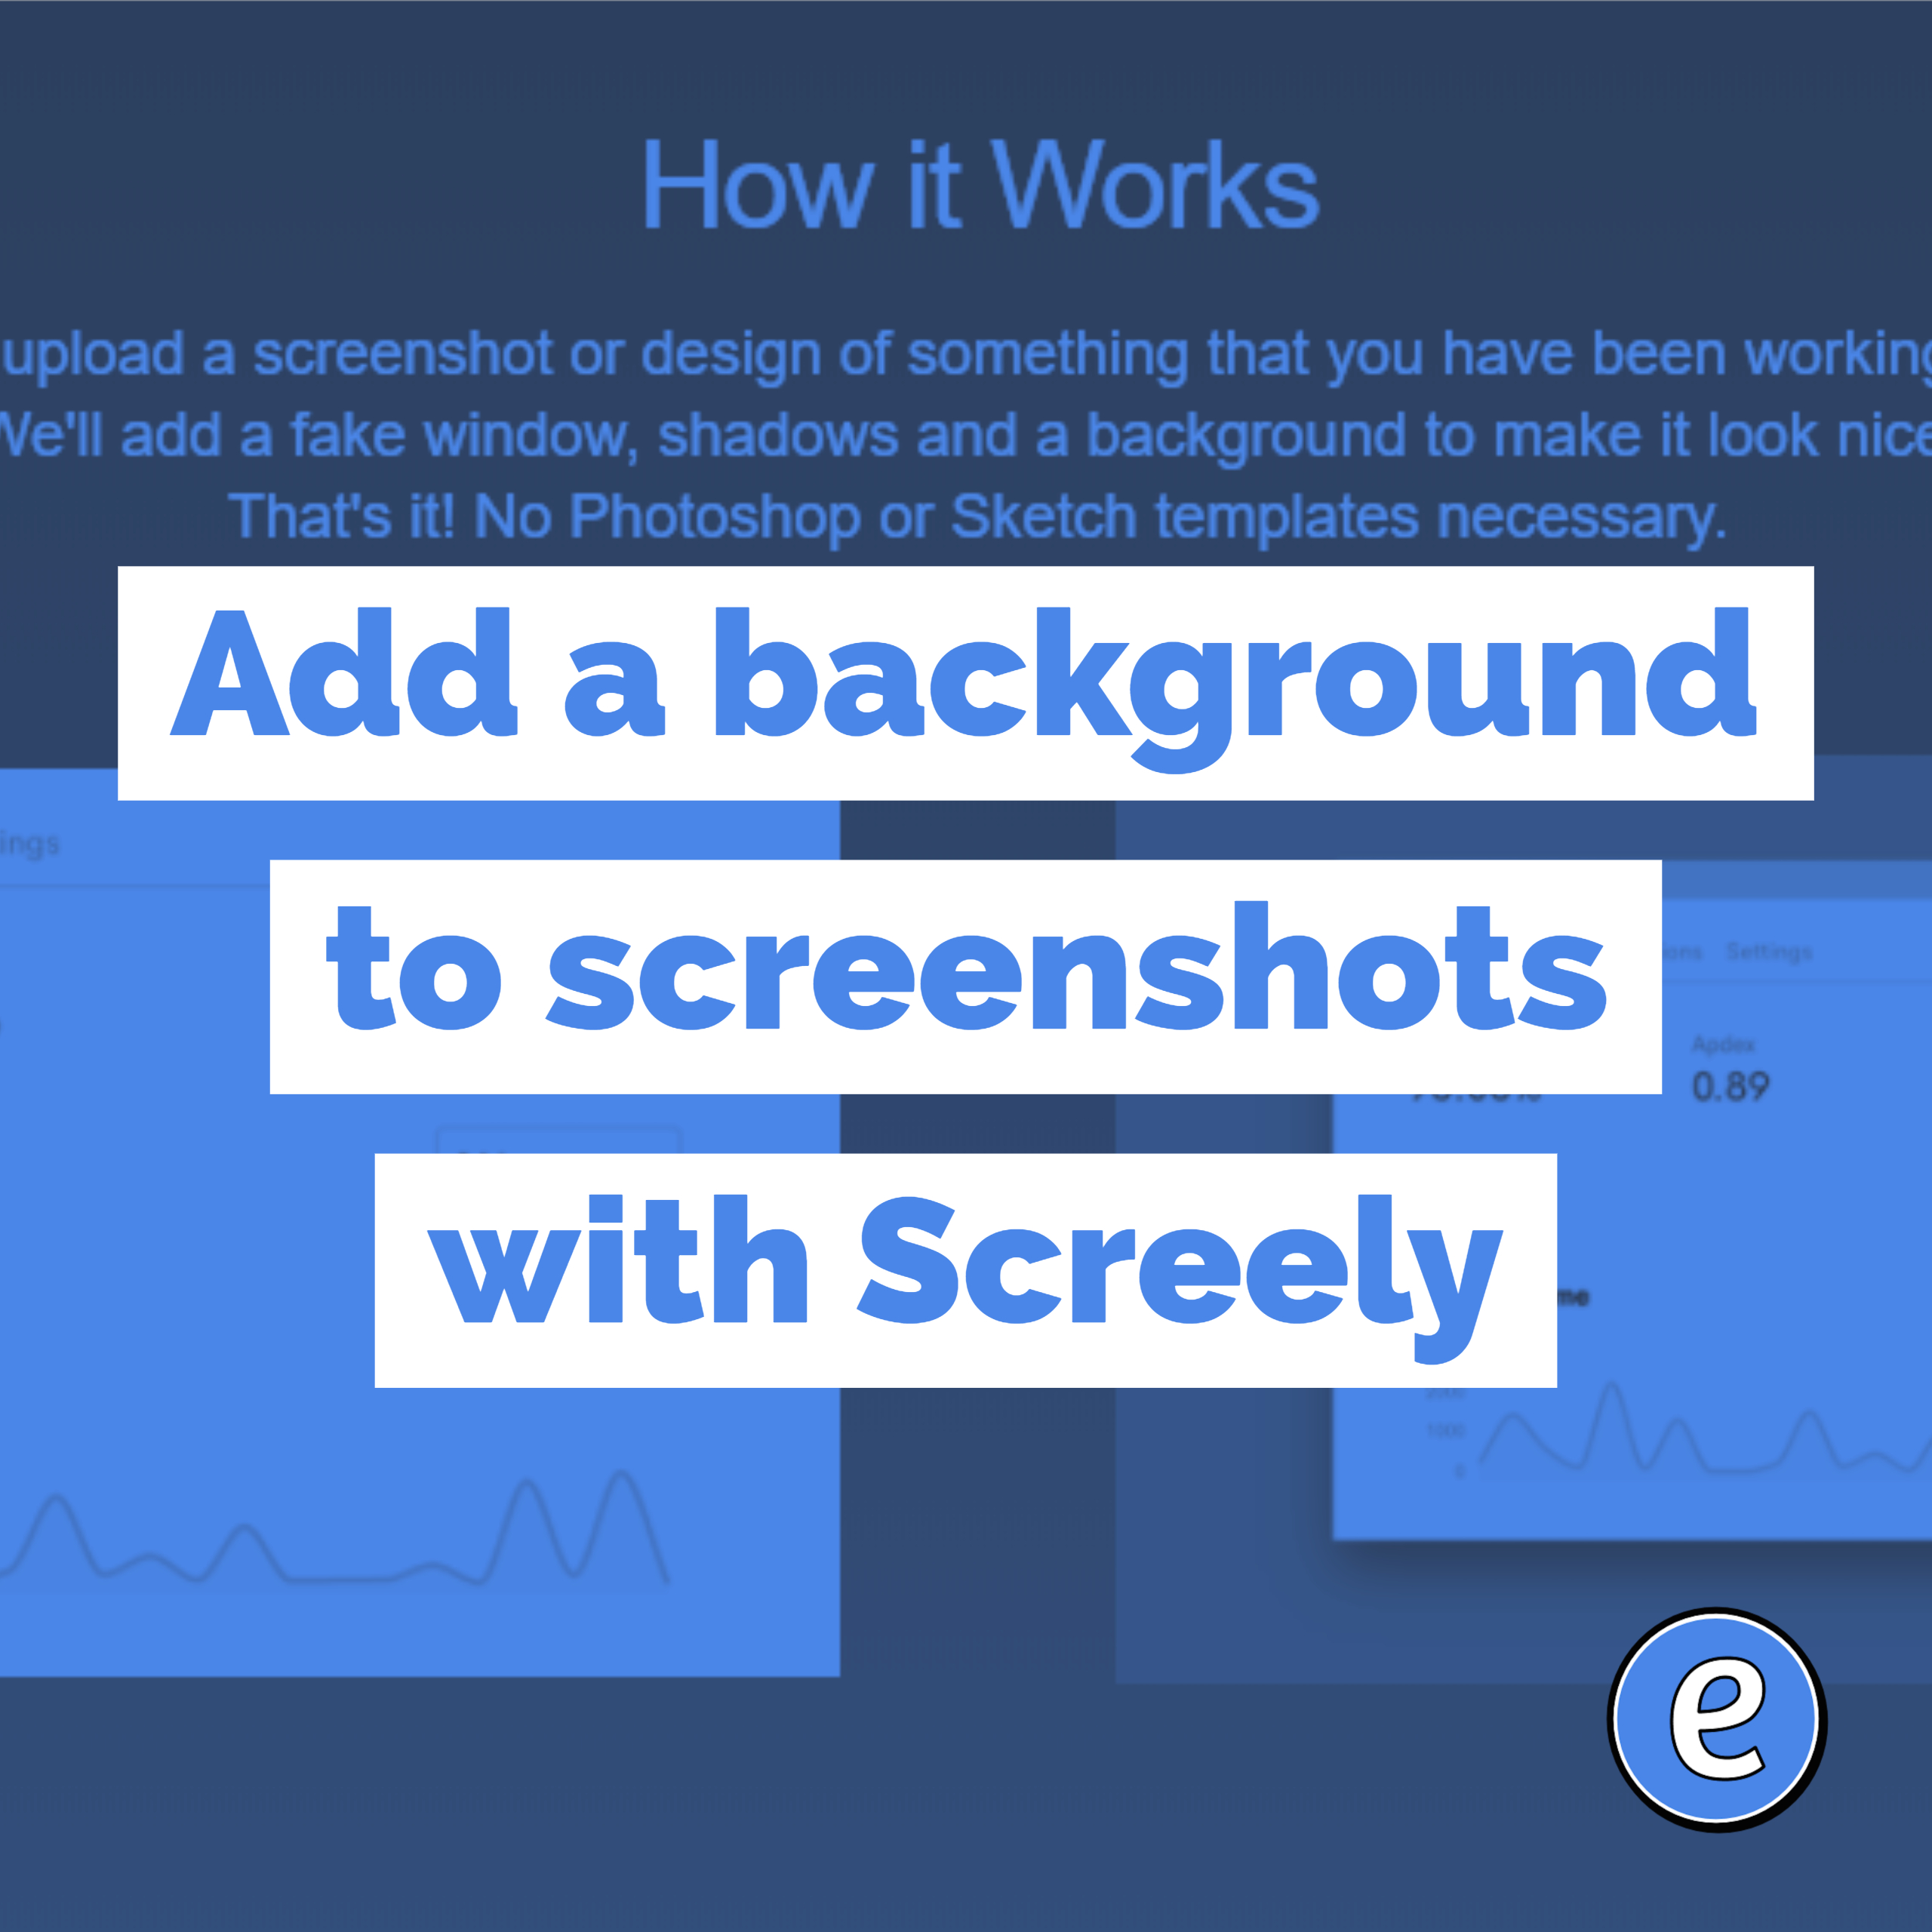 Add a background to screenshots with Screely